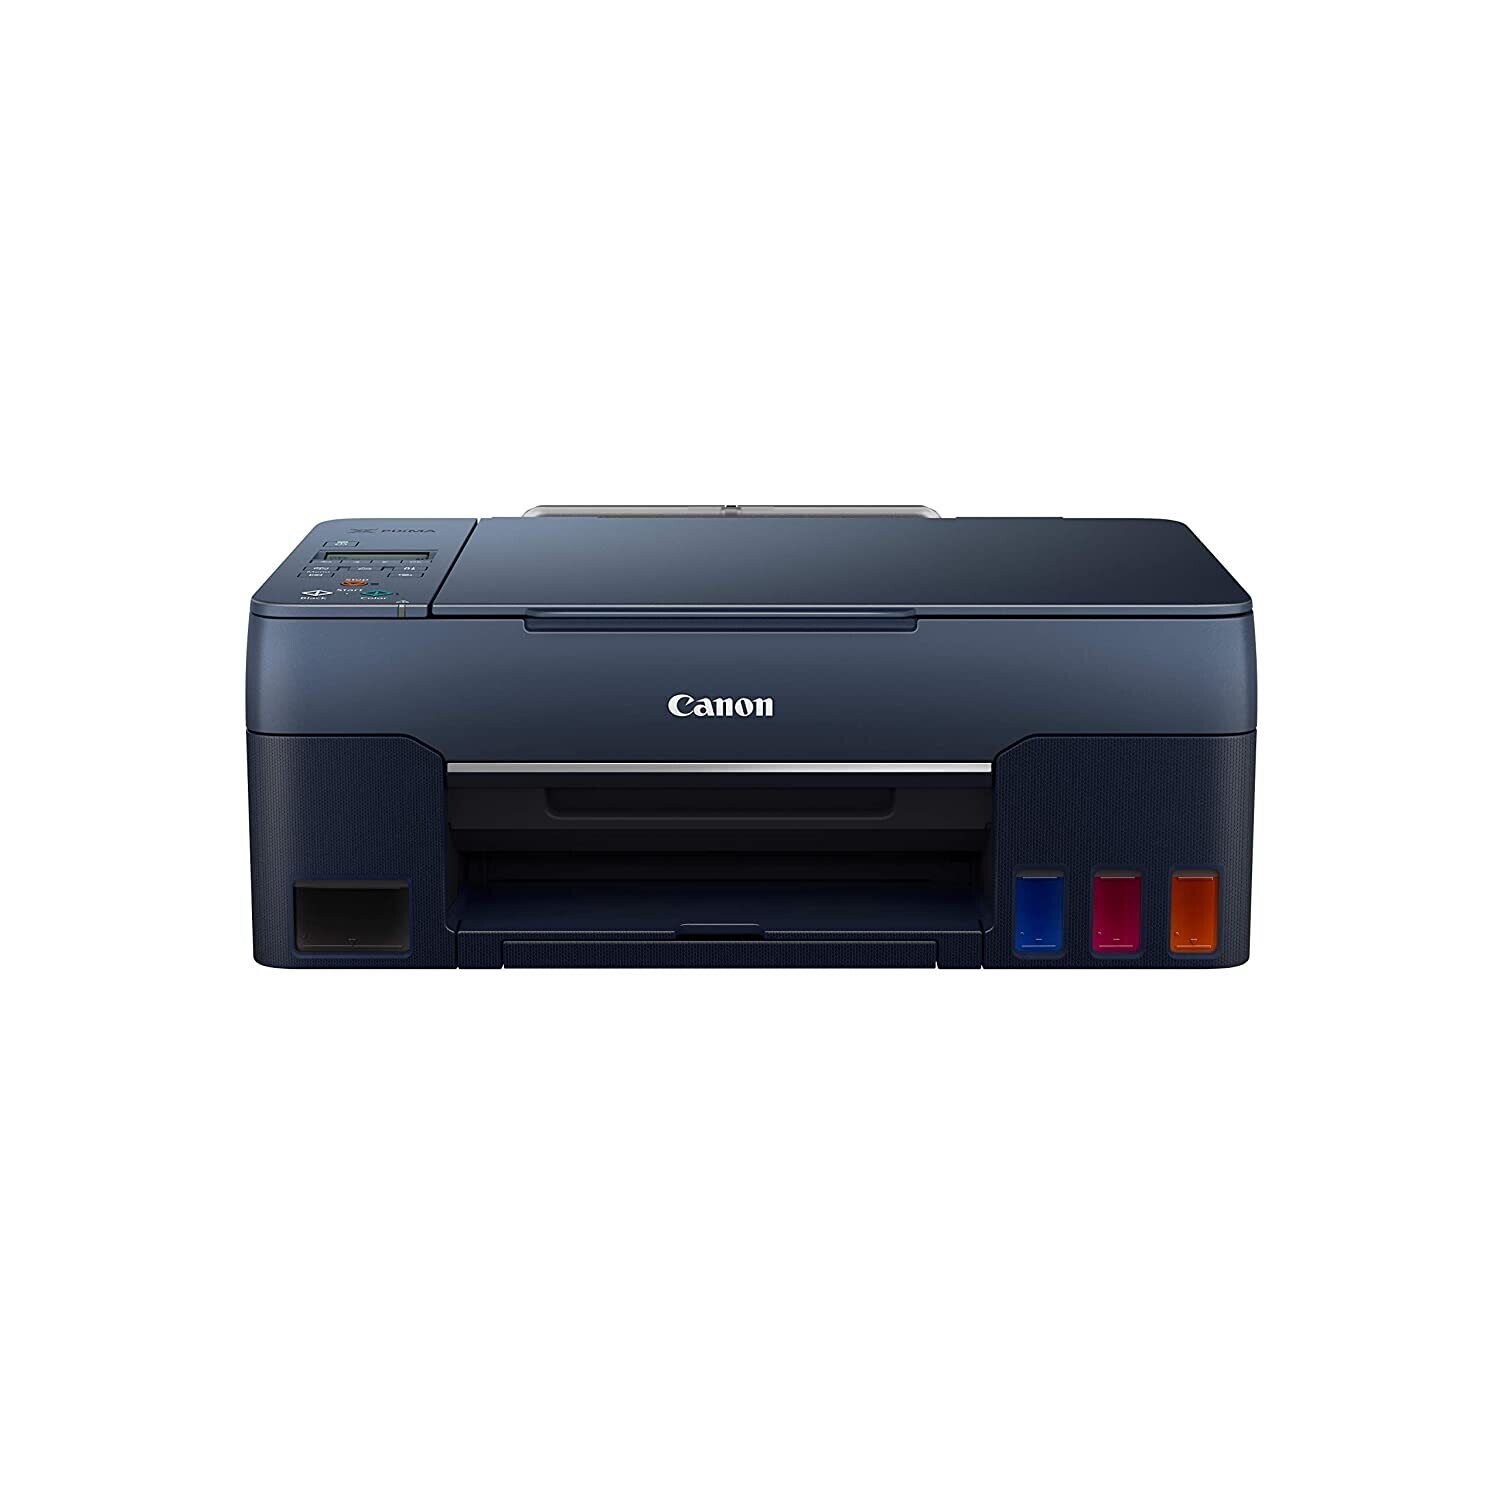 Canon PIXMA G3060 All-in-One Wi-Fi Ink Tank Printer